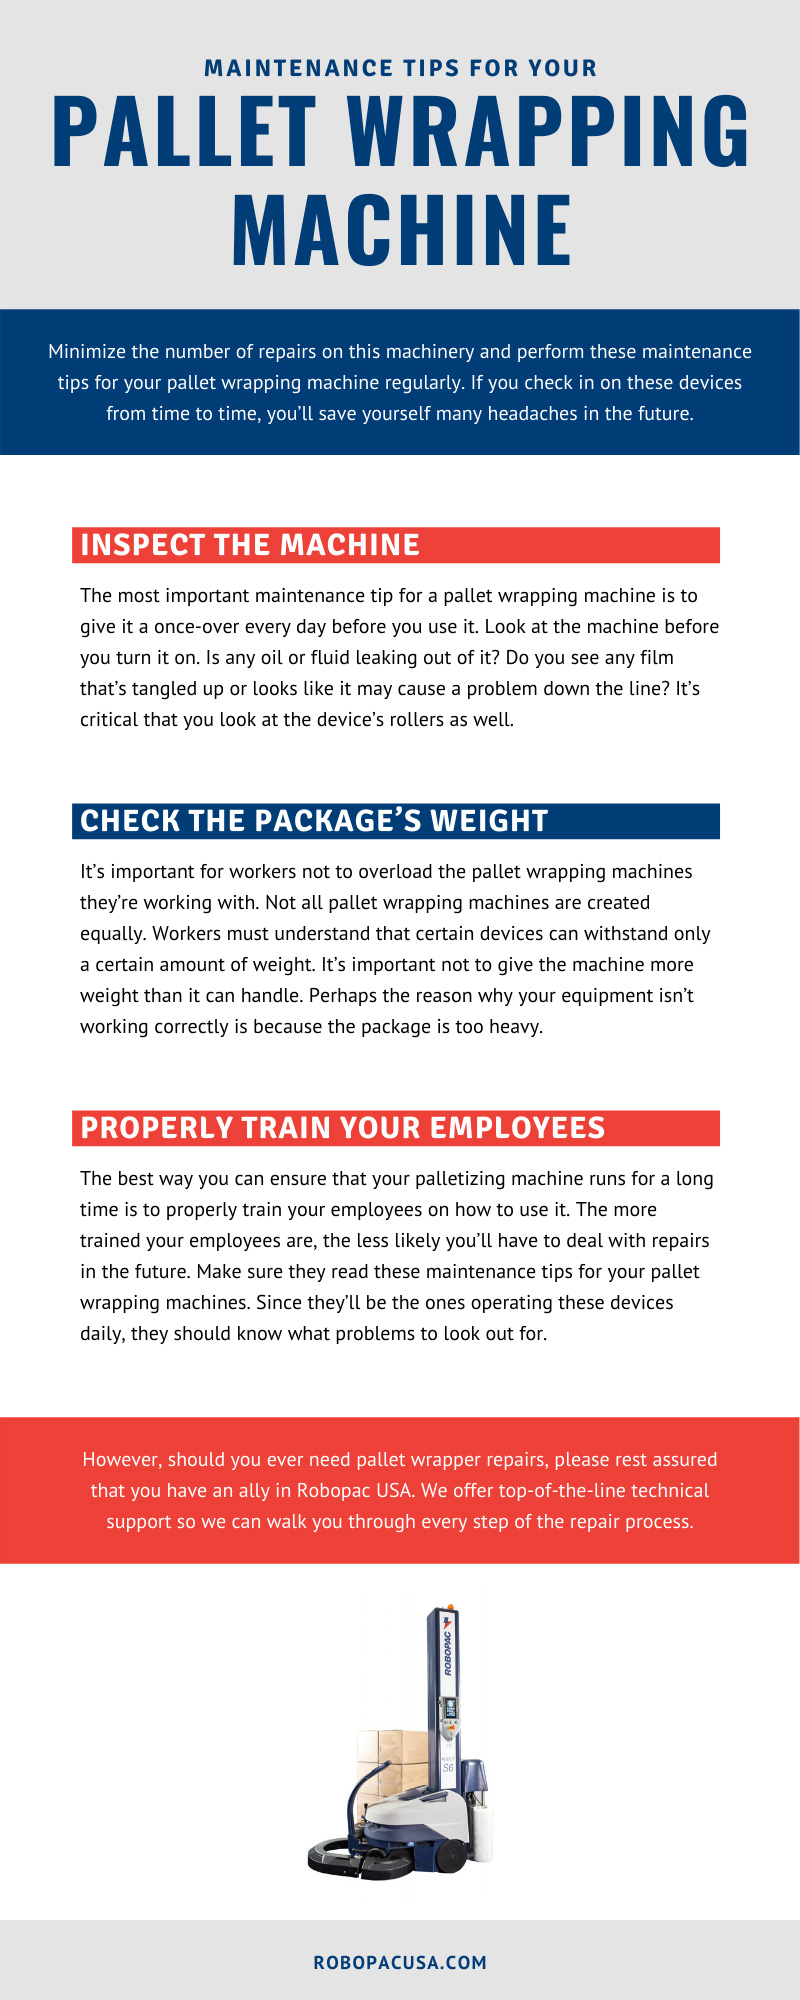 Maintenance Tips for Your Pallet Wrapping Machine